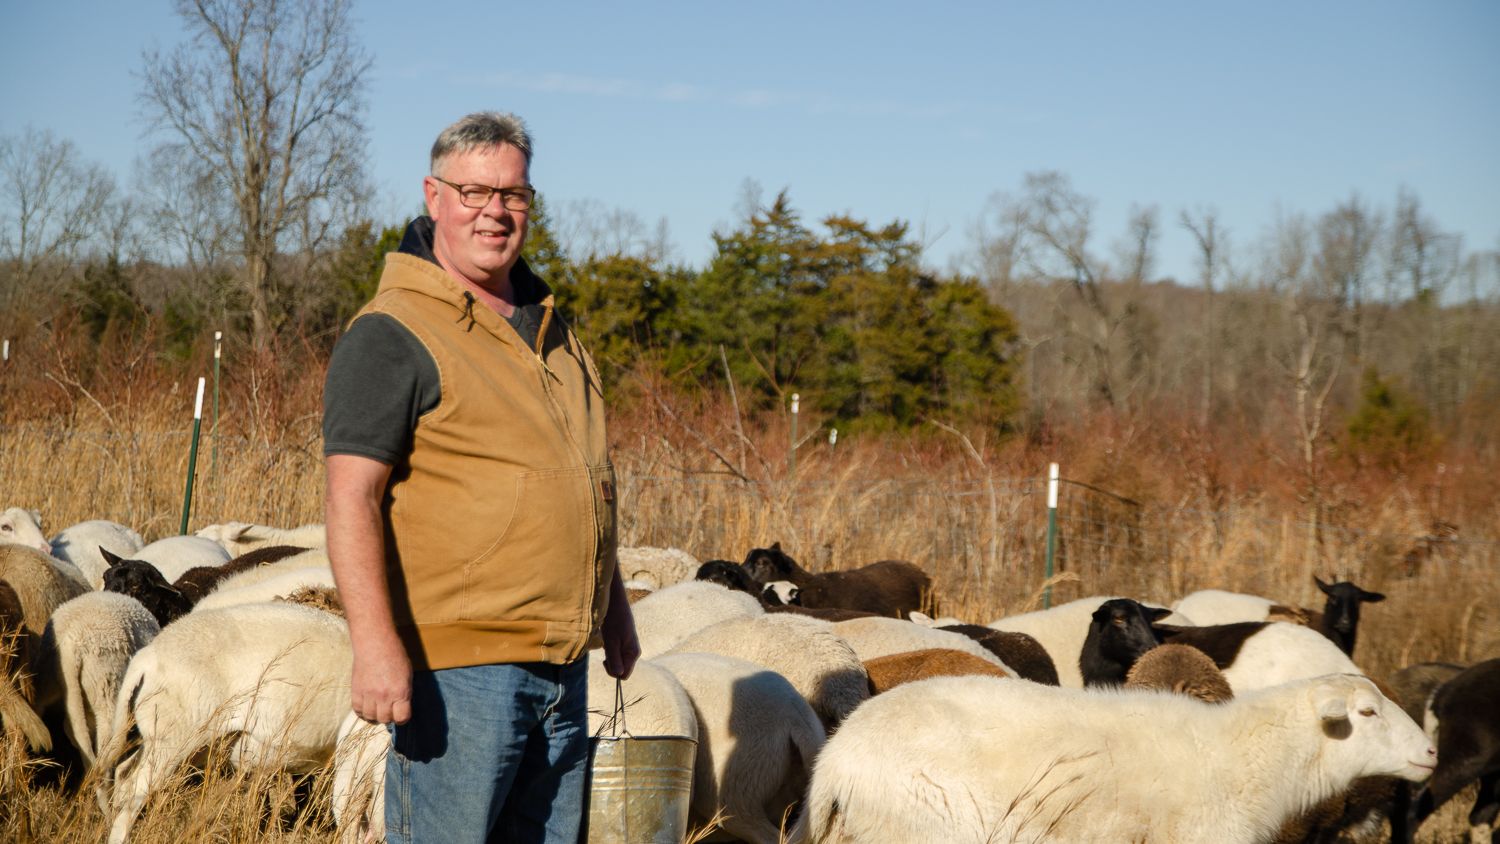 Dan Campeau standing outside surrounded by sheep